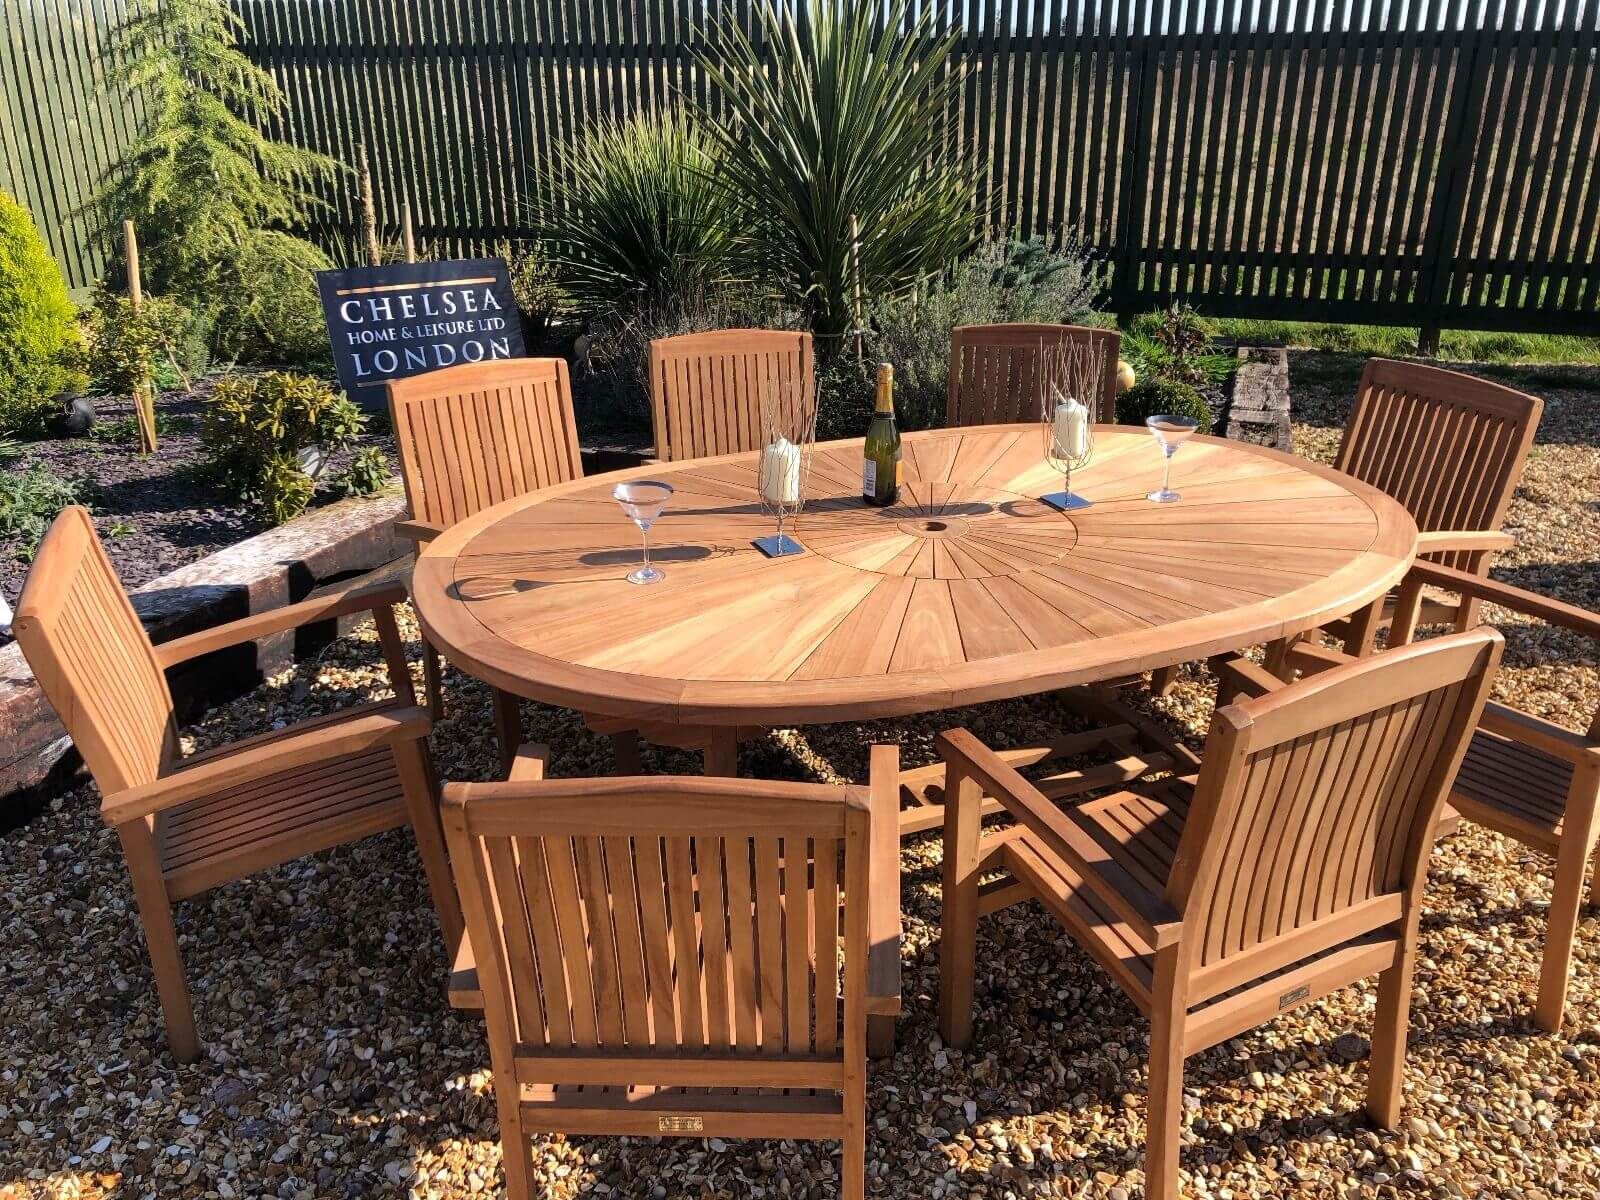 Teak Garden Furniture Premium Oval Table With 8 Teak Stacking Chairs Inside Teak Wicker Outdoor Dining Sets (View 6 of 15)